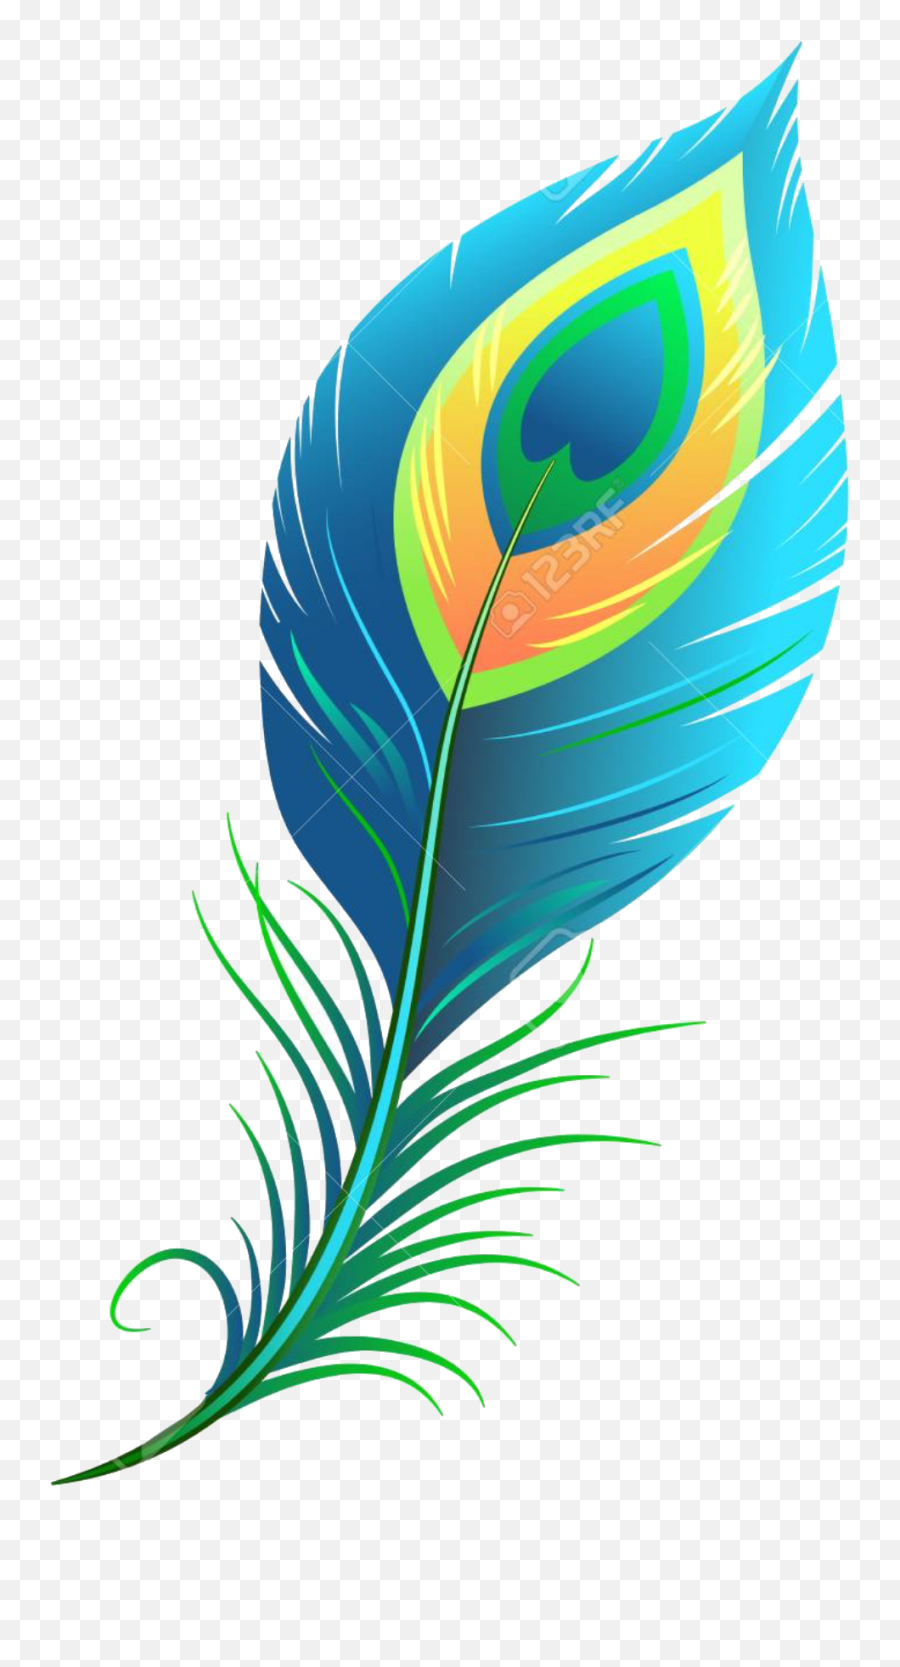 Peacock Feathers Clipart - Peacock Feather Illustration Emoji,Feather Clipart